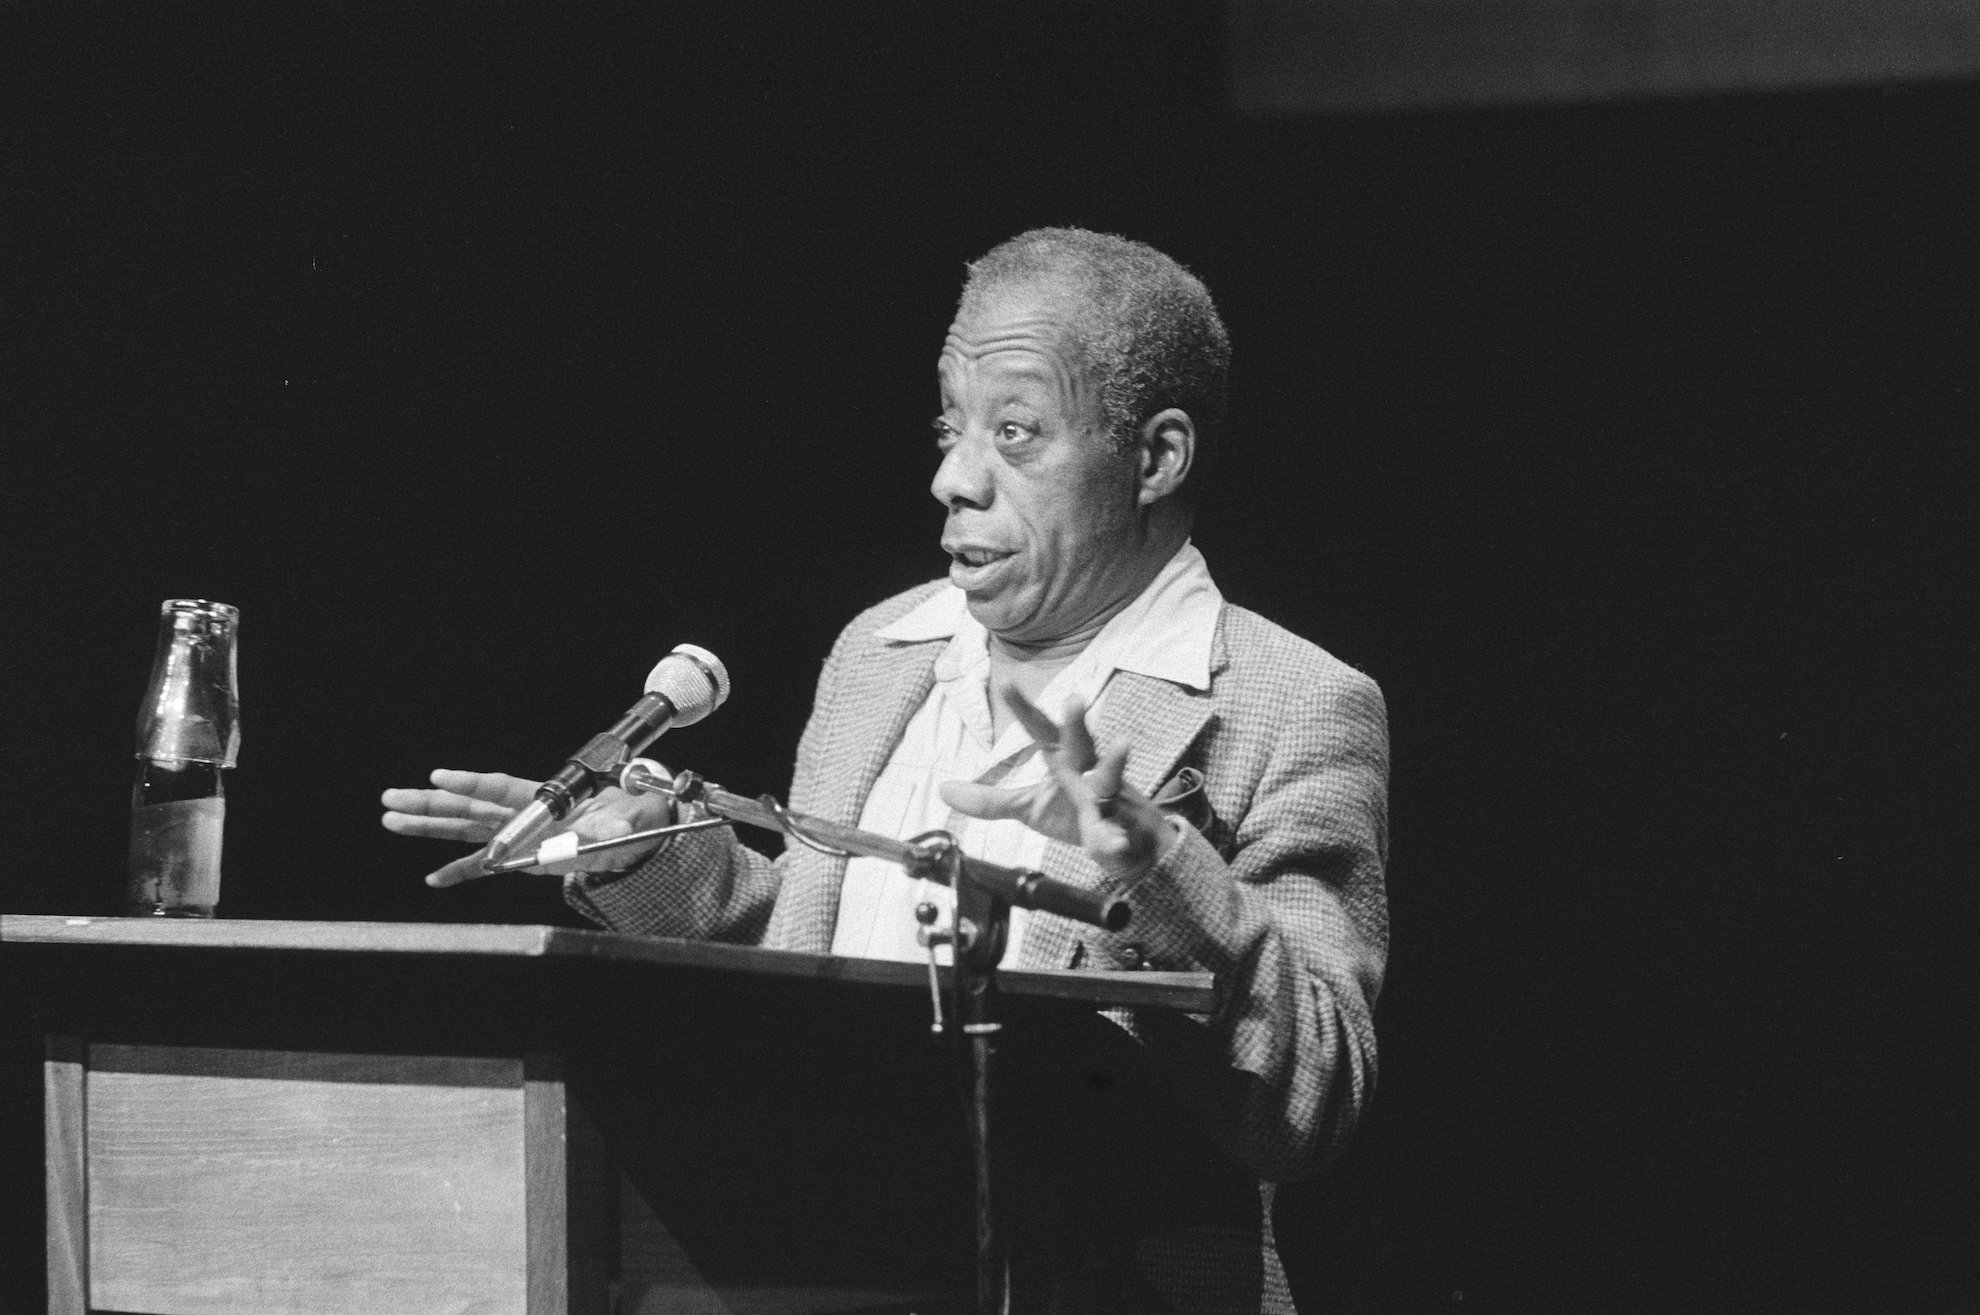 The Artist’s Struggle for Integrity: on a speech by James Baldwin